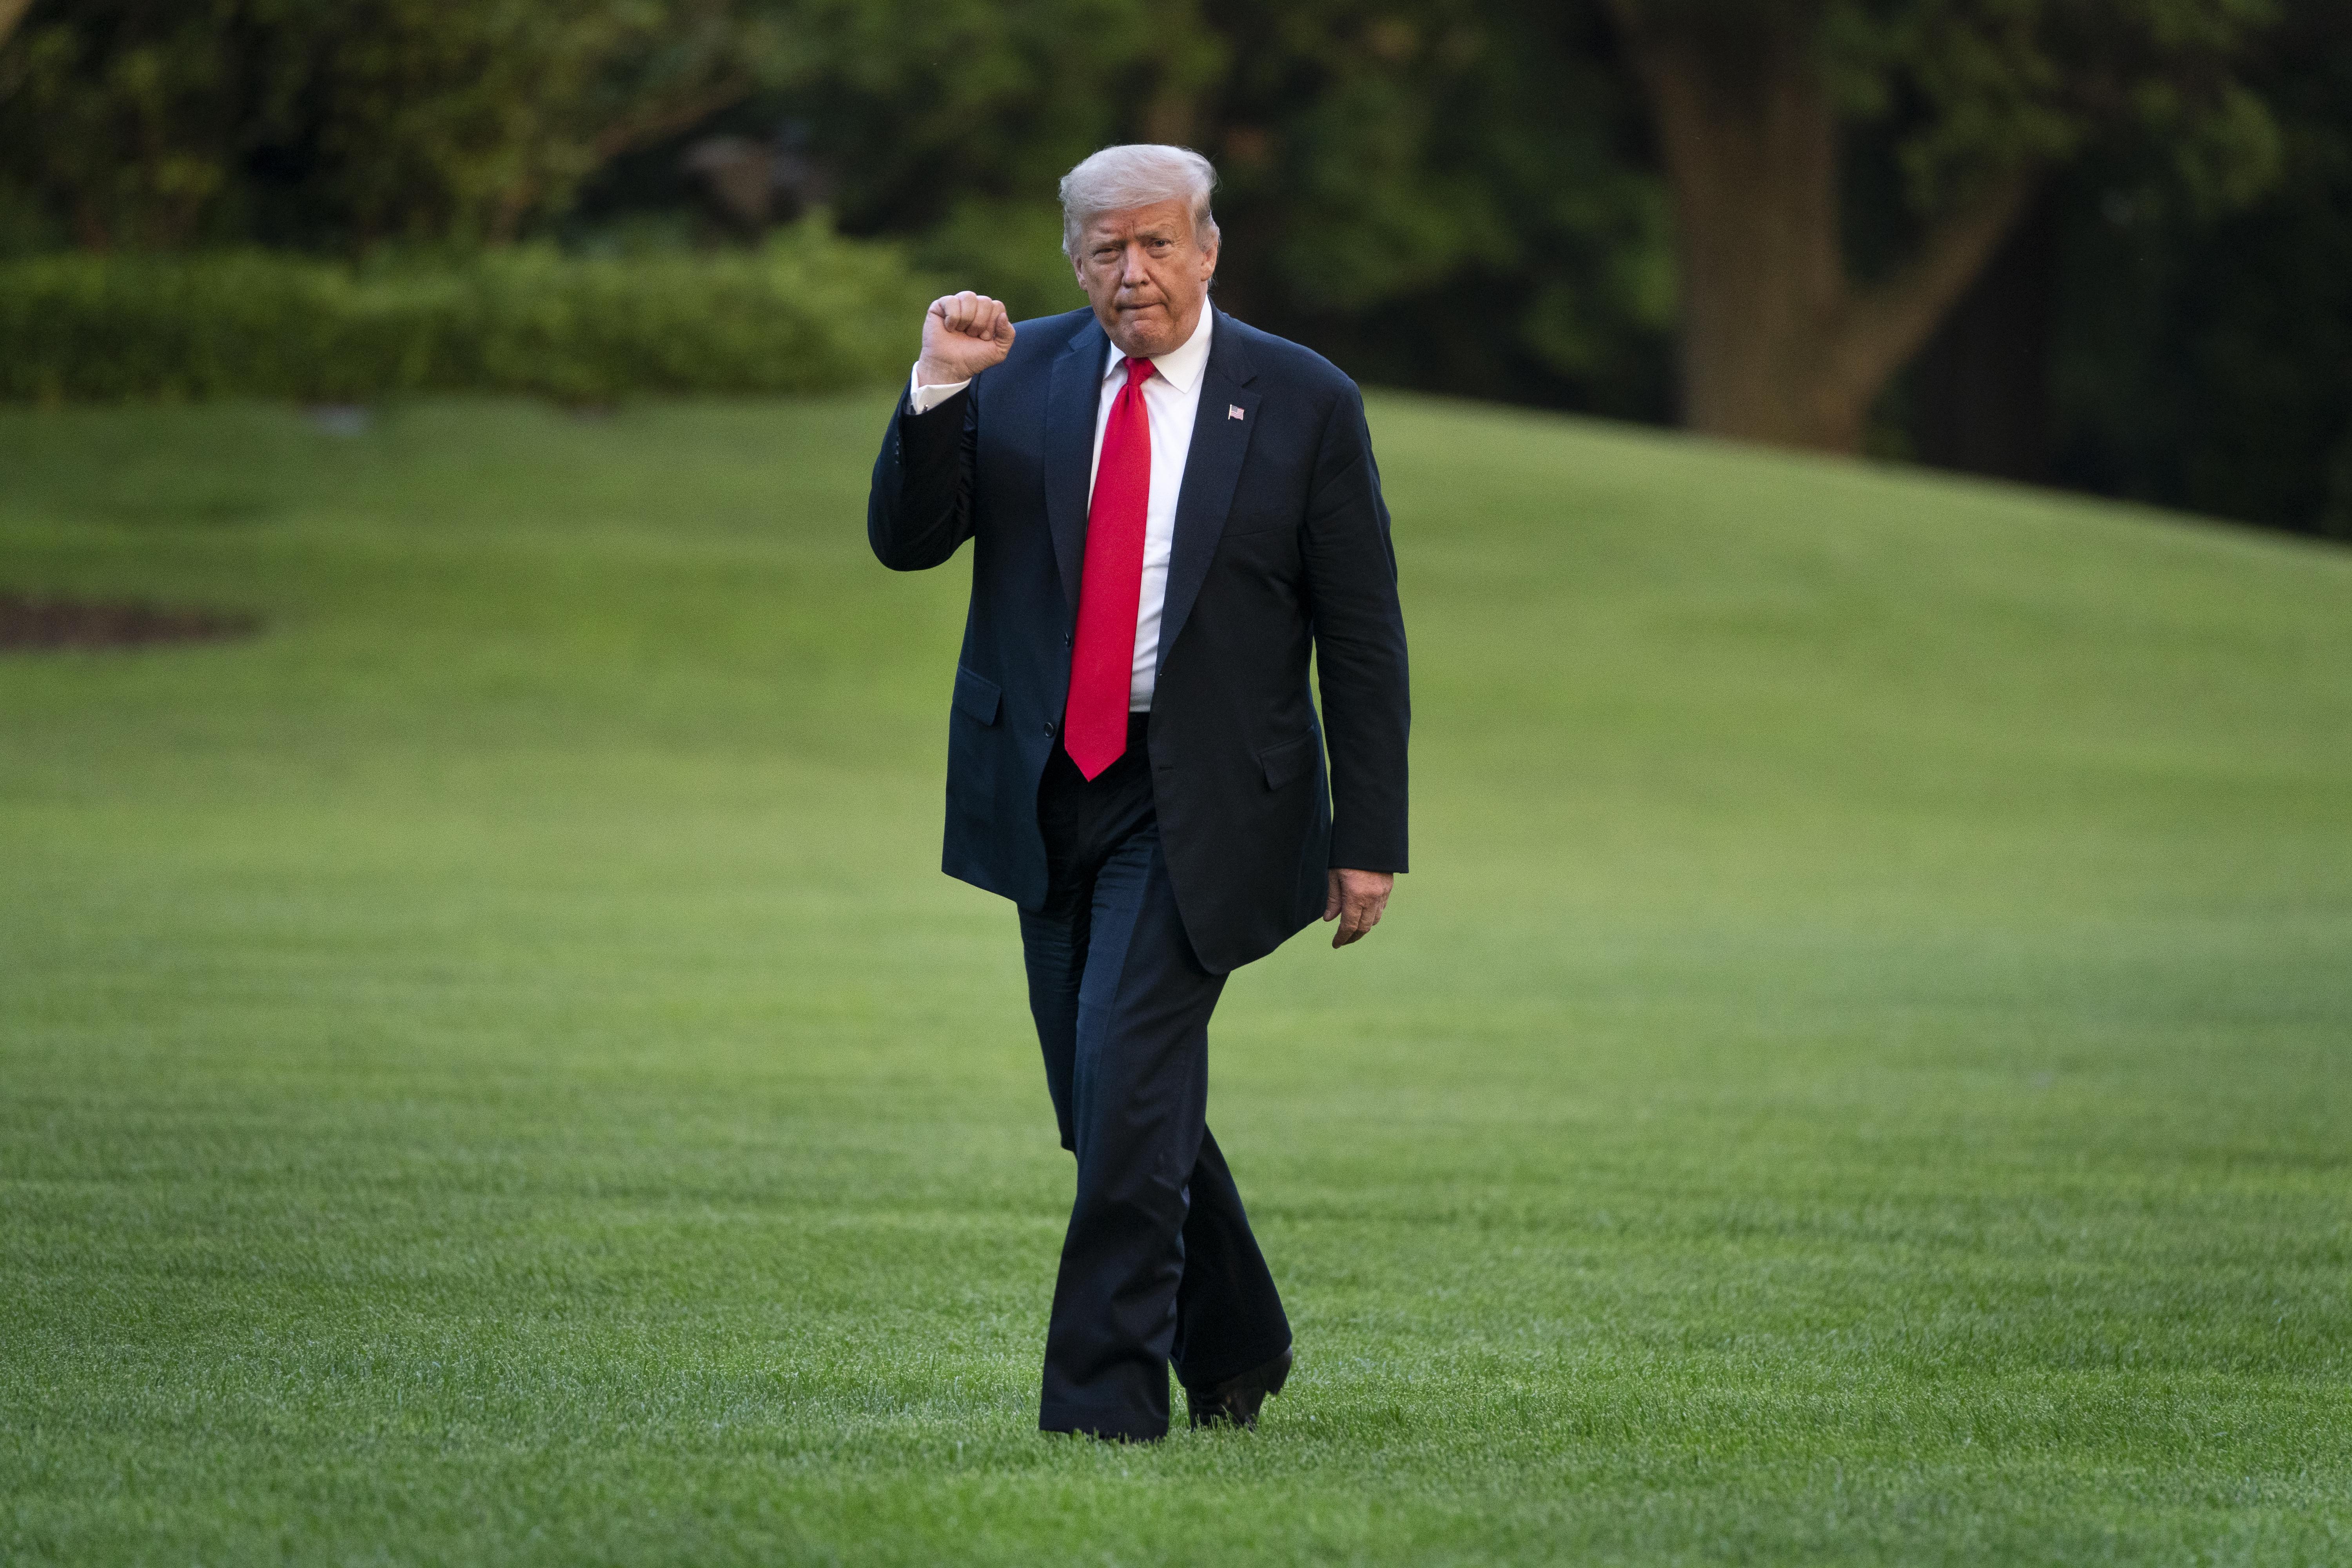 Donald Trump raises a fist as he walks across the South Lawn of the White House